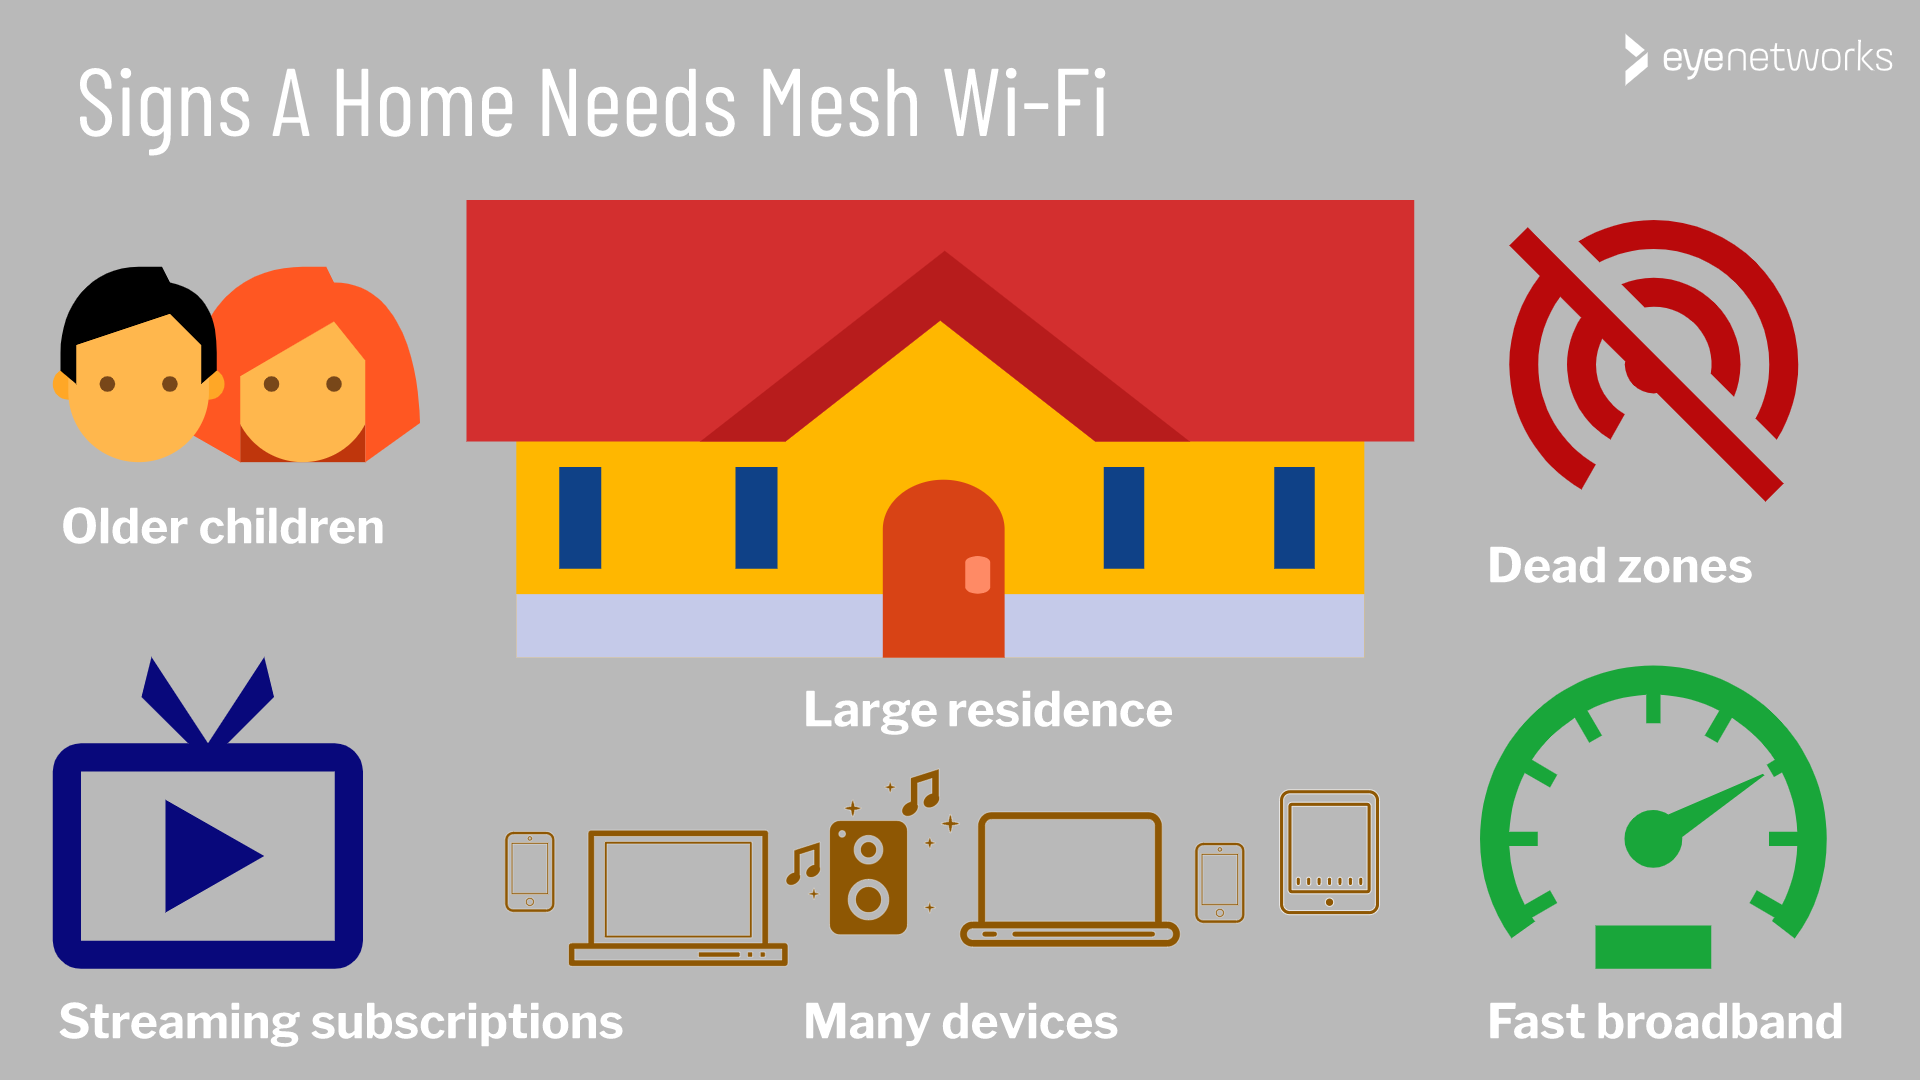 Signs a home need mesh wi-fi: Large home, older children, streaming subscriptions, many devices, dead zones, fast broadband